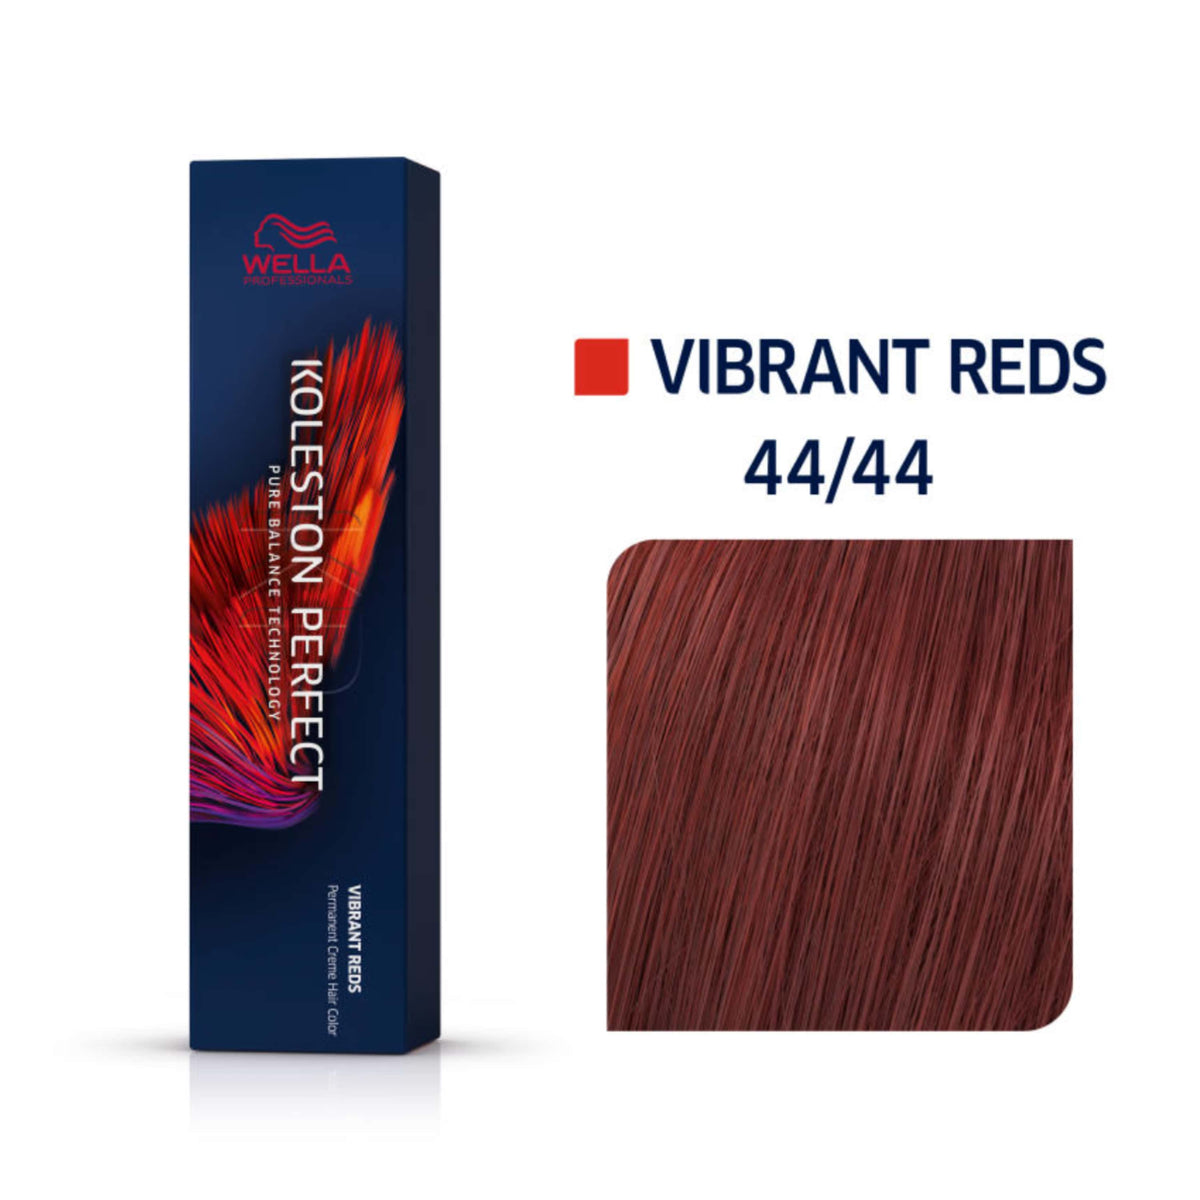 a box of wella vibrant reds hair color